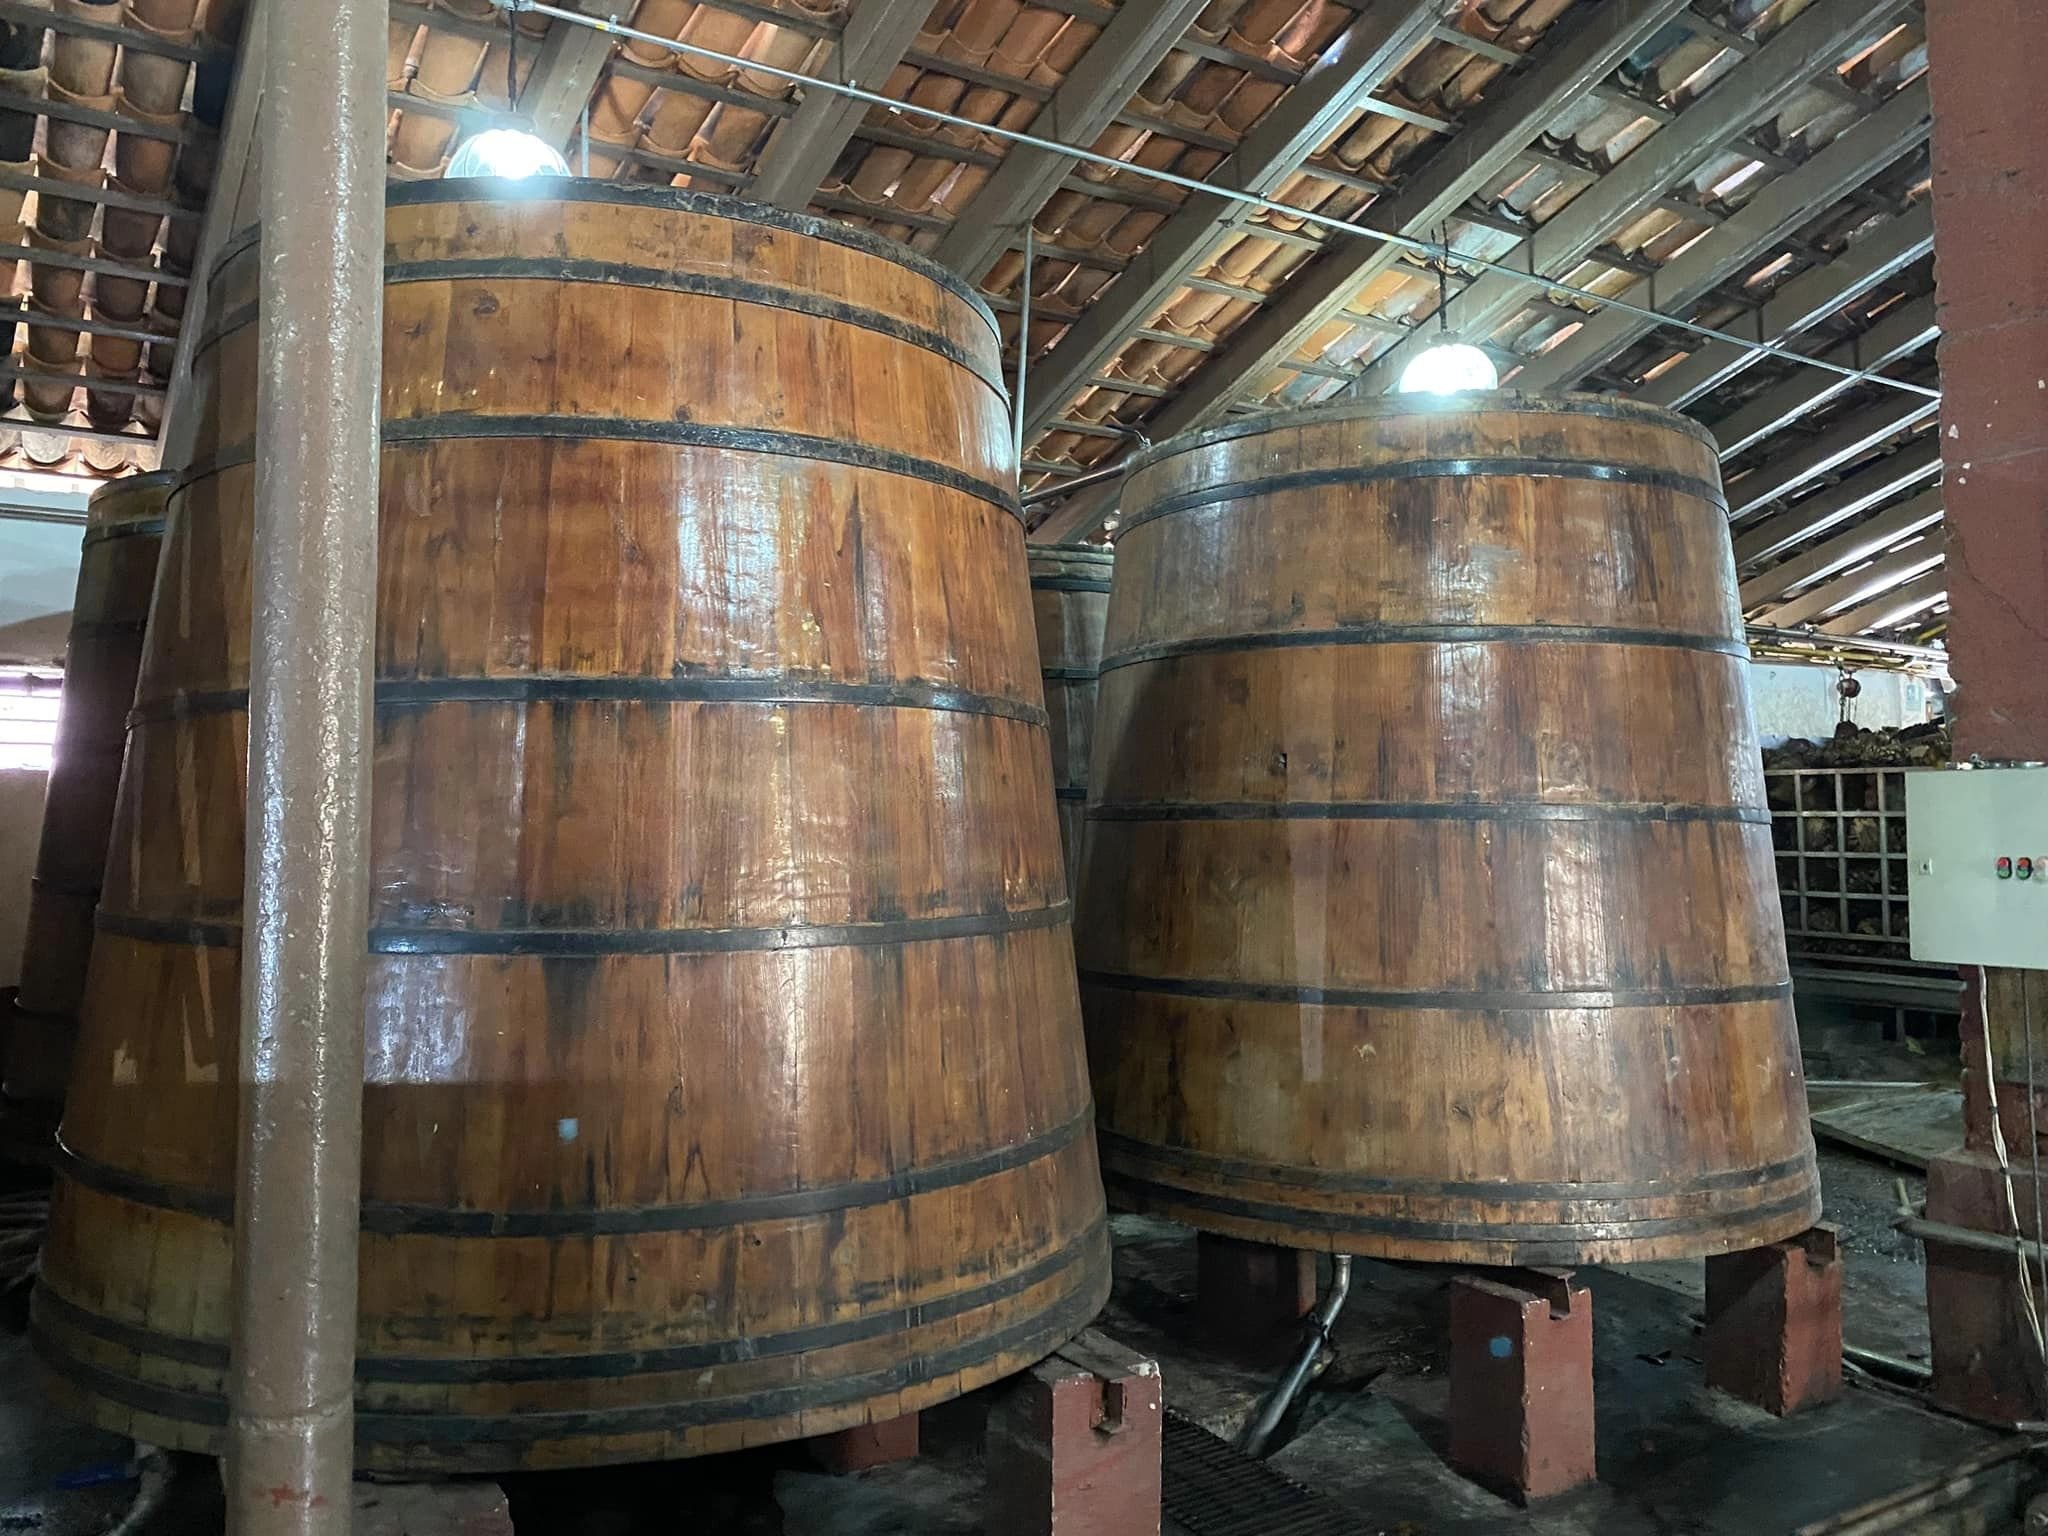 Fermentation tanks -  note wooden barrels as used in centuries past